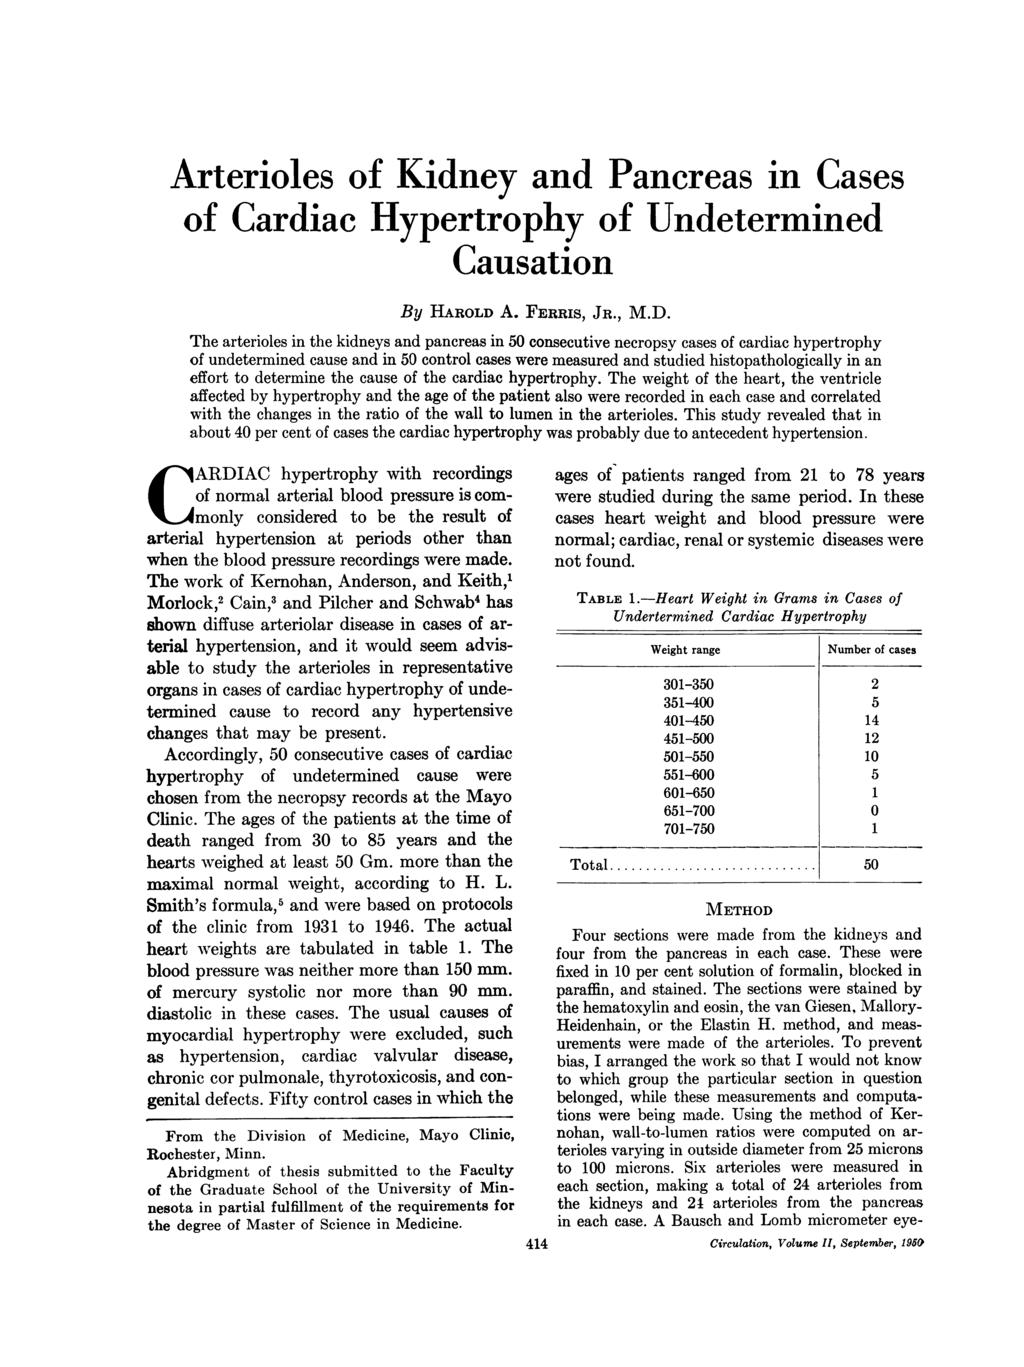 Arterioles of Kidney and Pancreas in Cases of Cardiac Hypertrophy of Undetermined Causation By HAROLD 